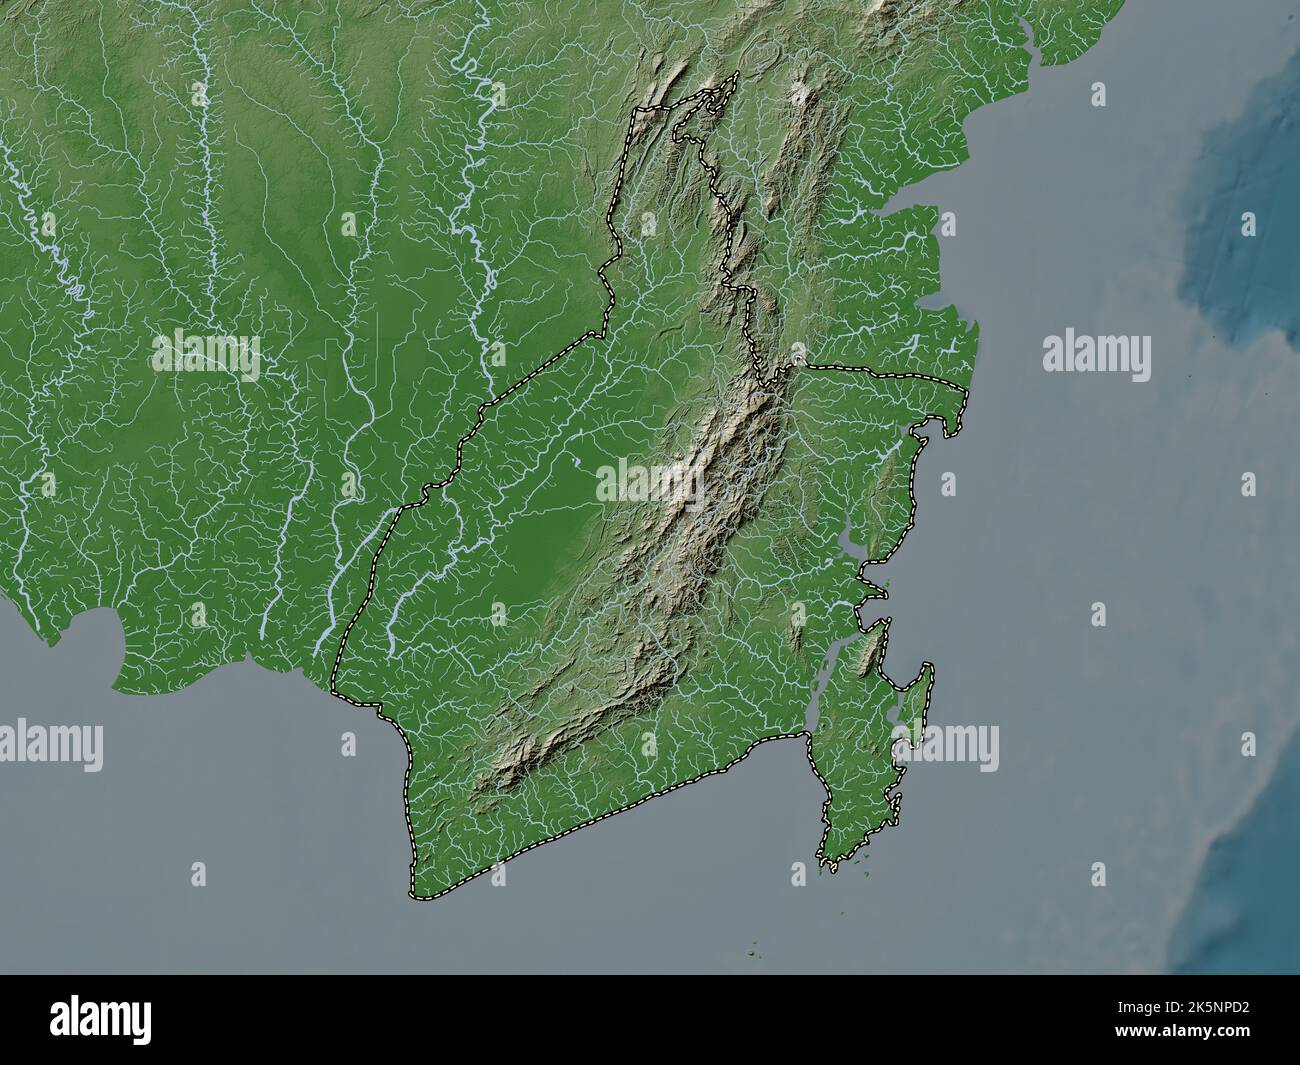 Kalimantan Selatan, province of Indonesia. Elevation map colored in wiki style with lakes and rivers Stock Photo